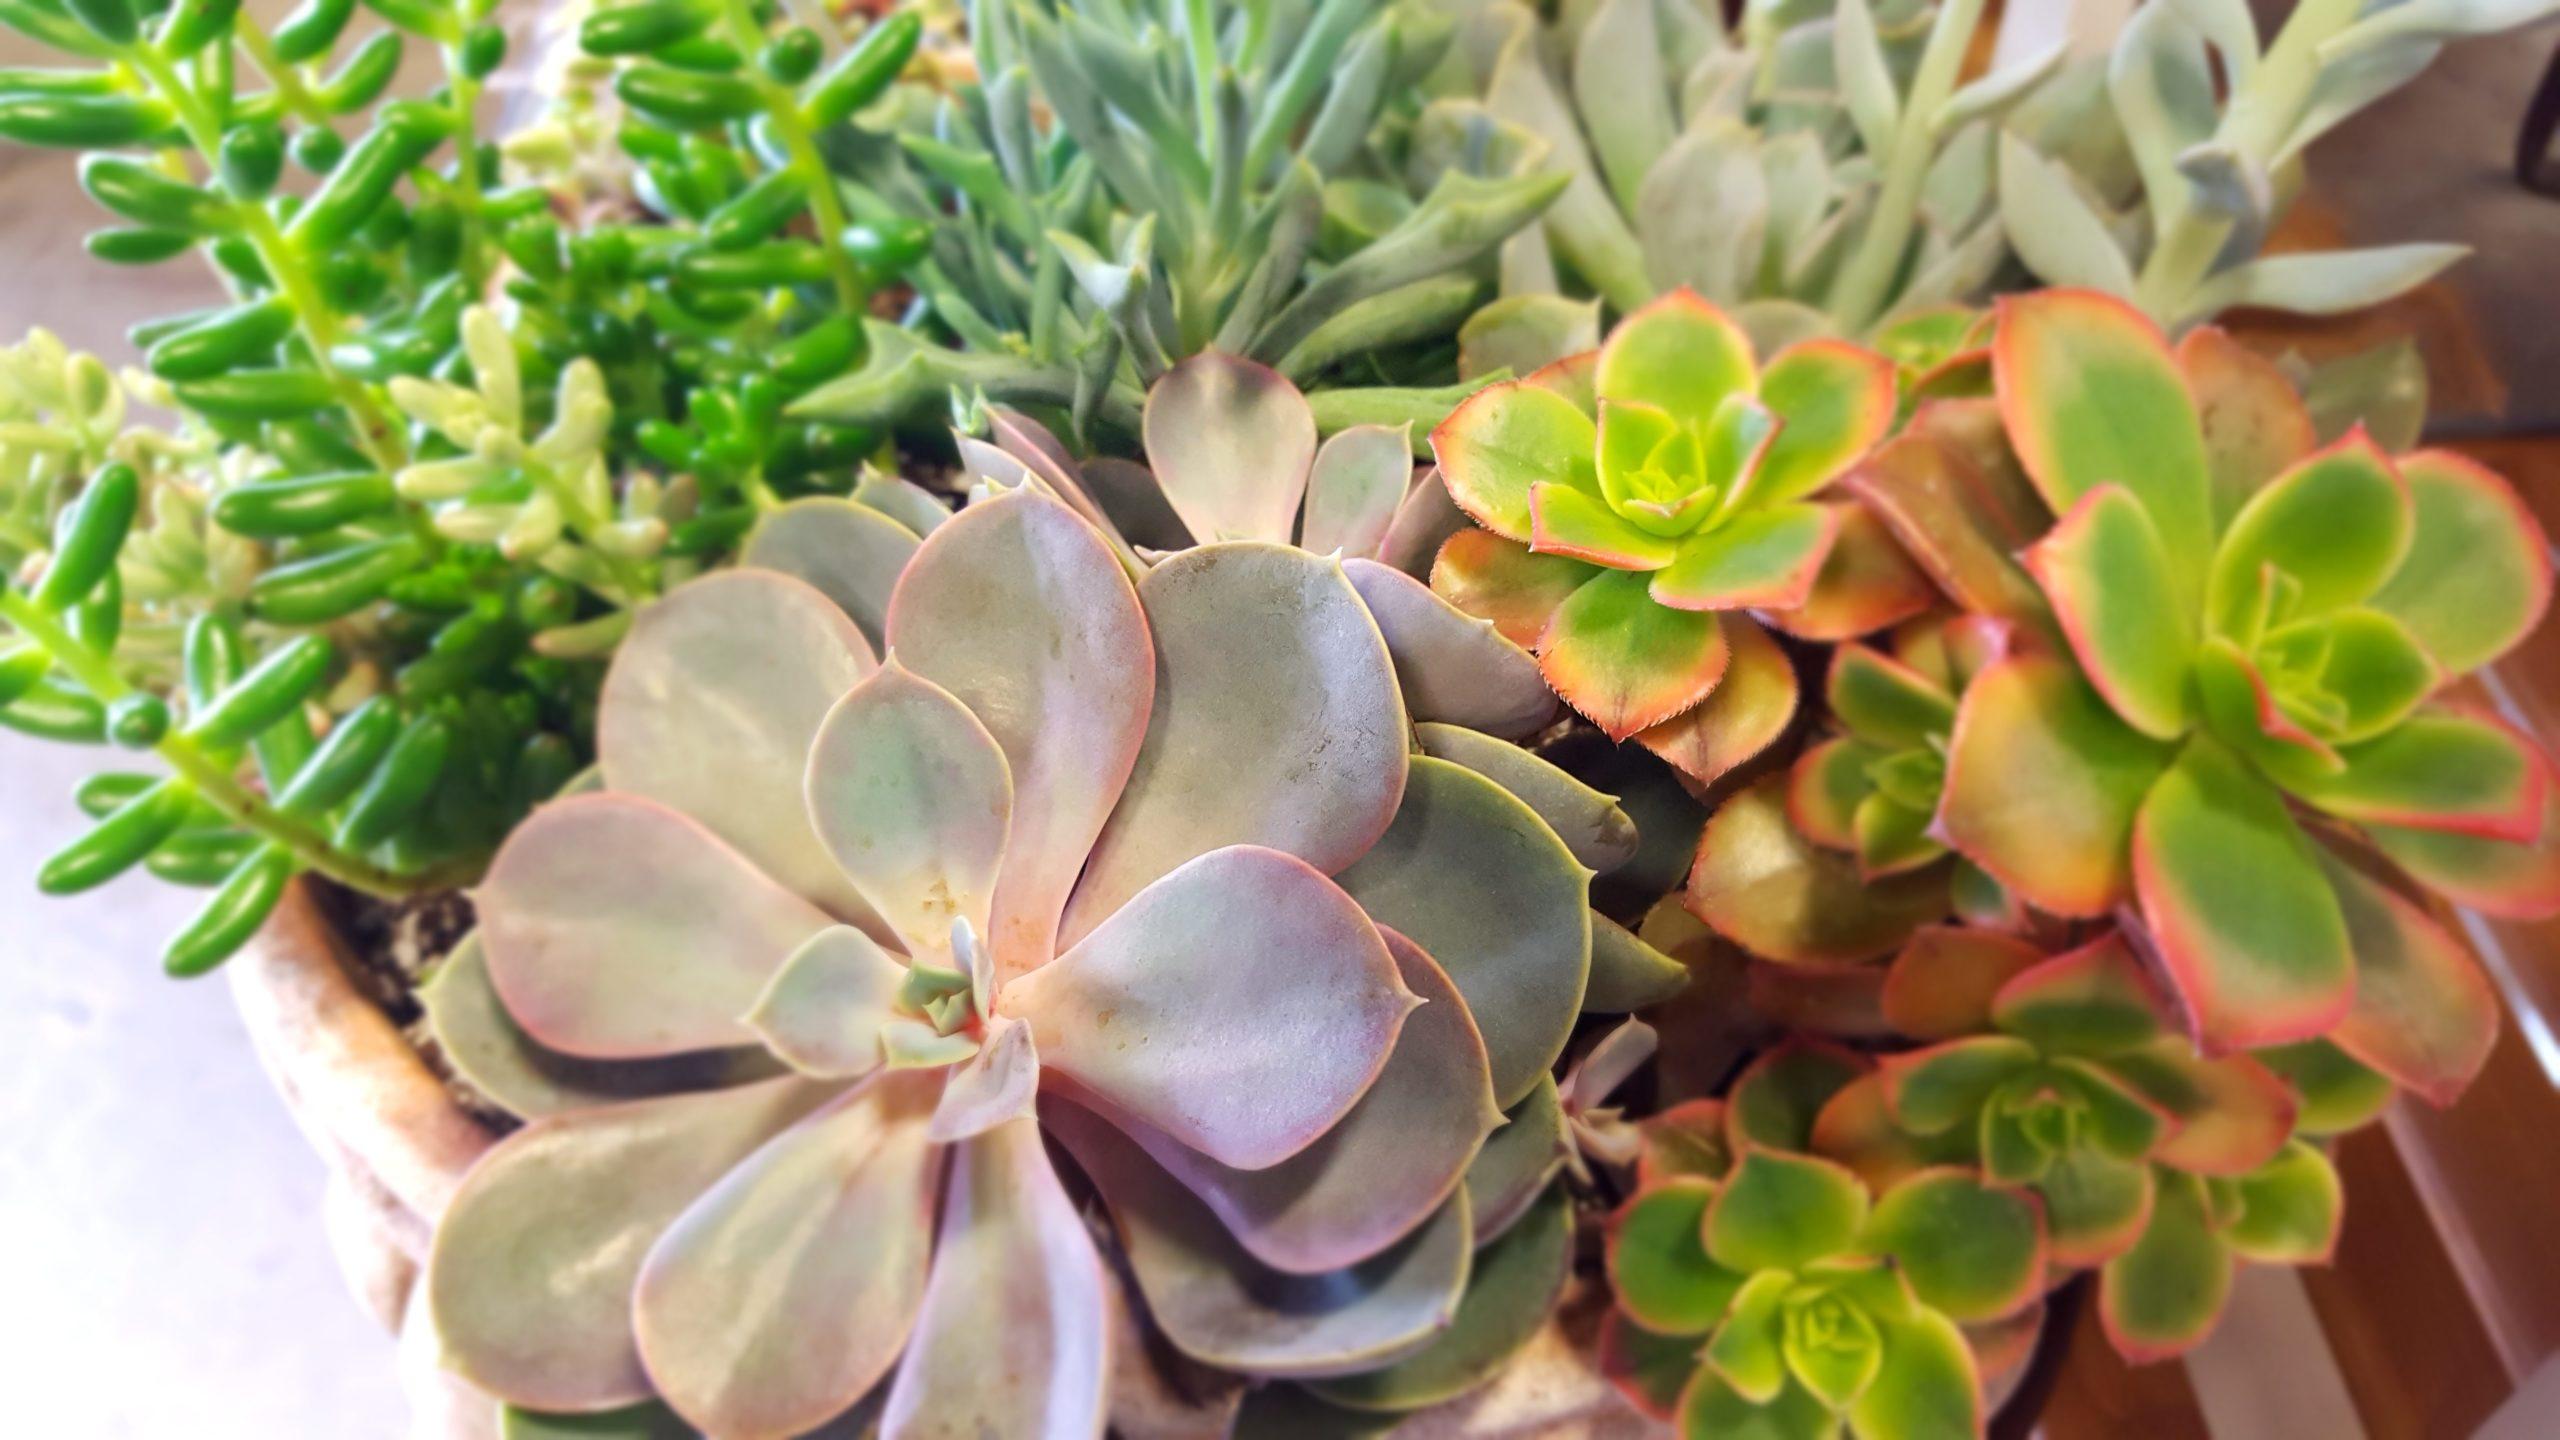 Succulents Rule, So Here Are Succulent Rules! 